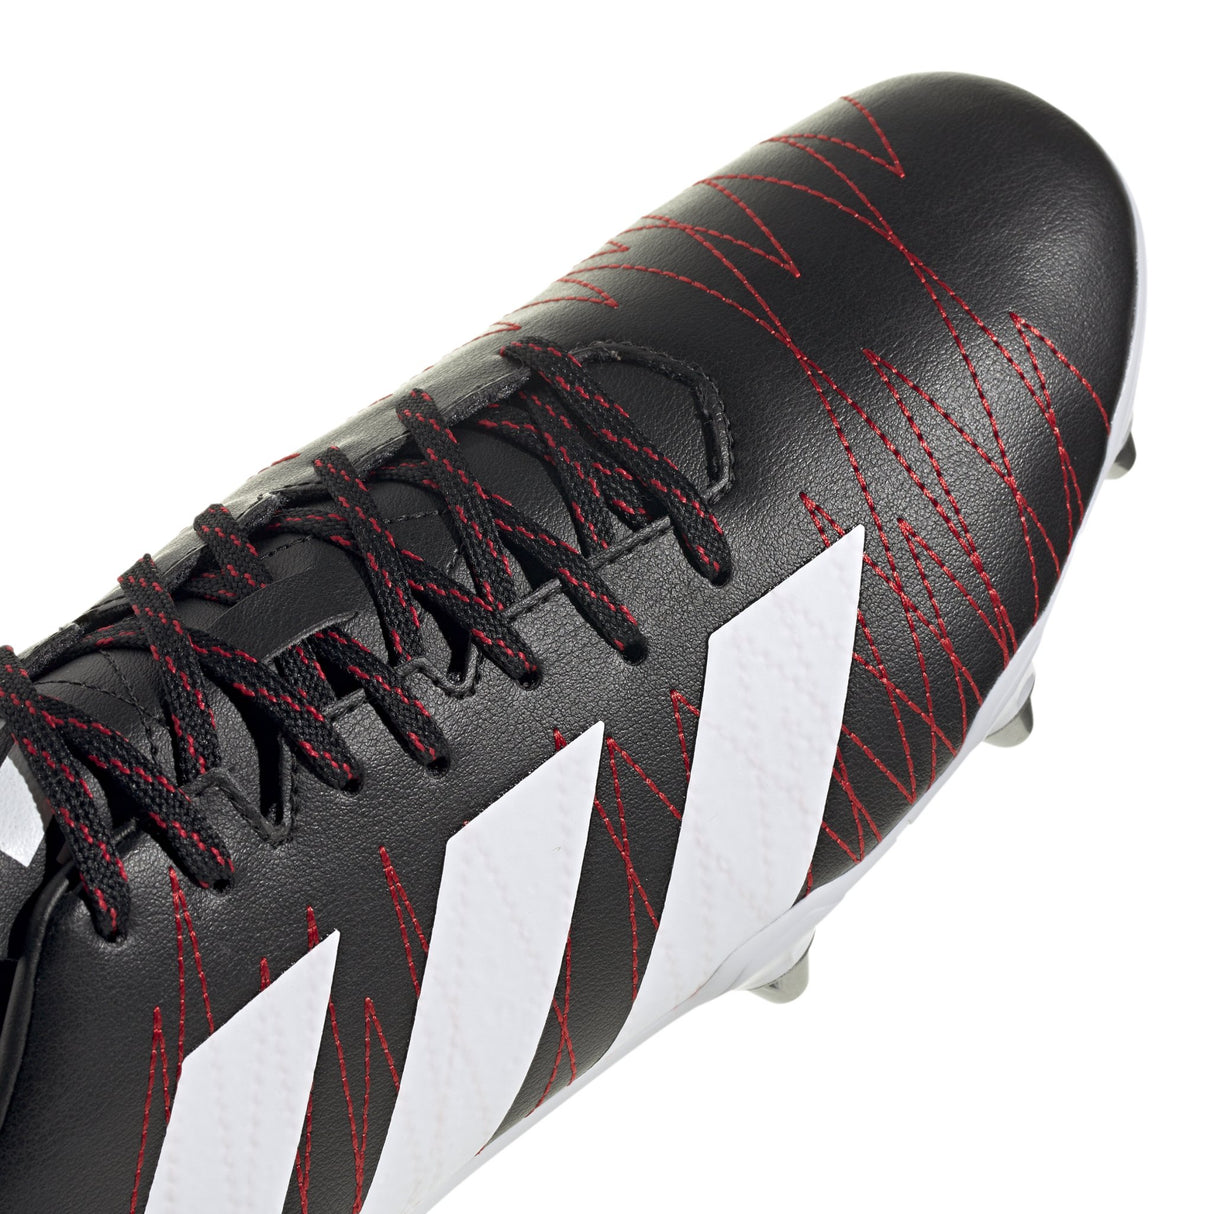 Adidas Kakari Rugby Boots 24 - SG |Boots | Adidas | Absolute Rugby